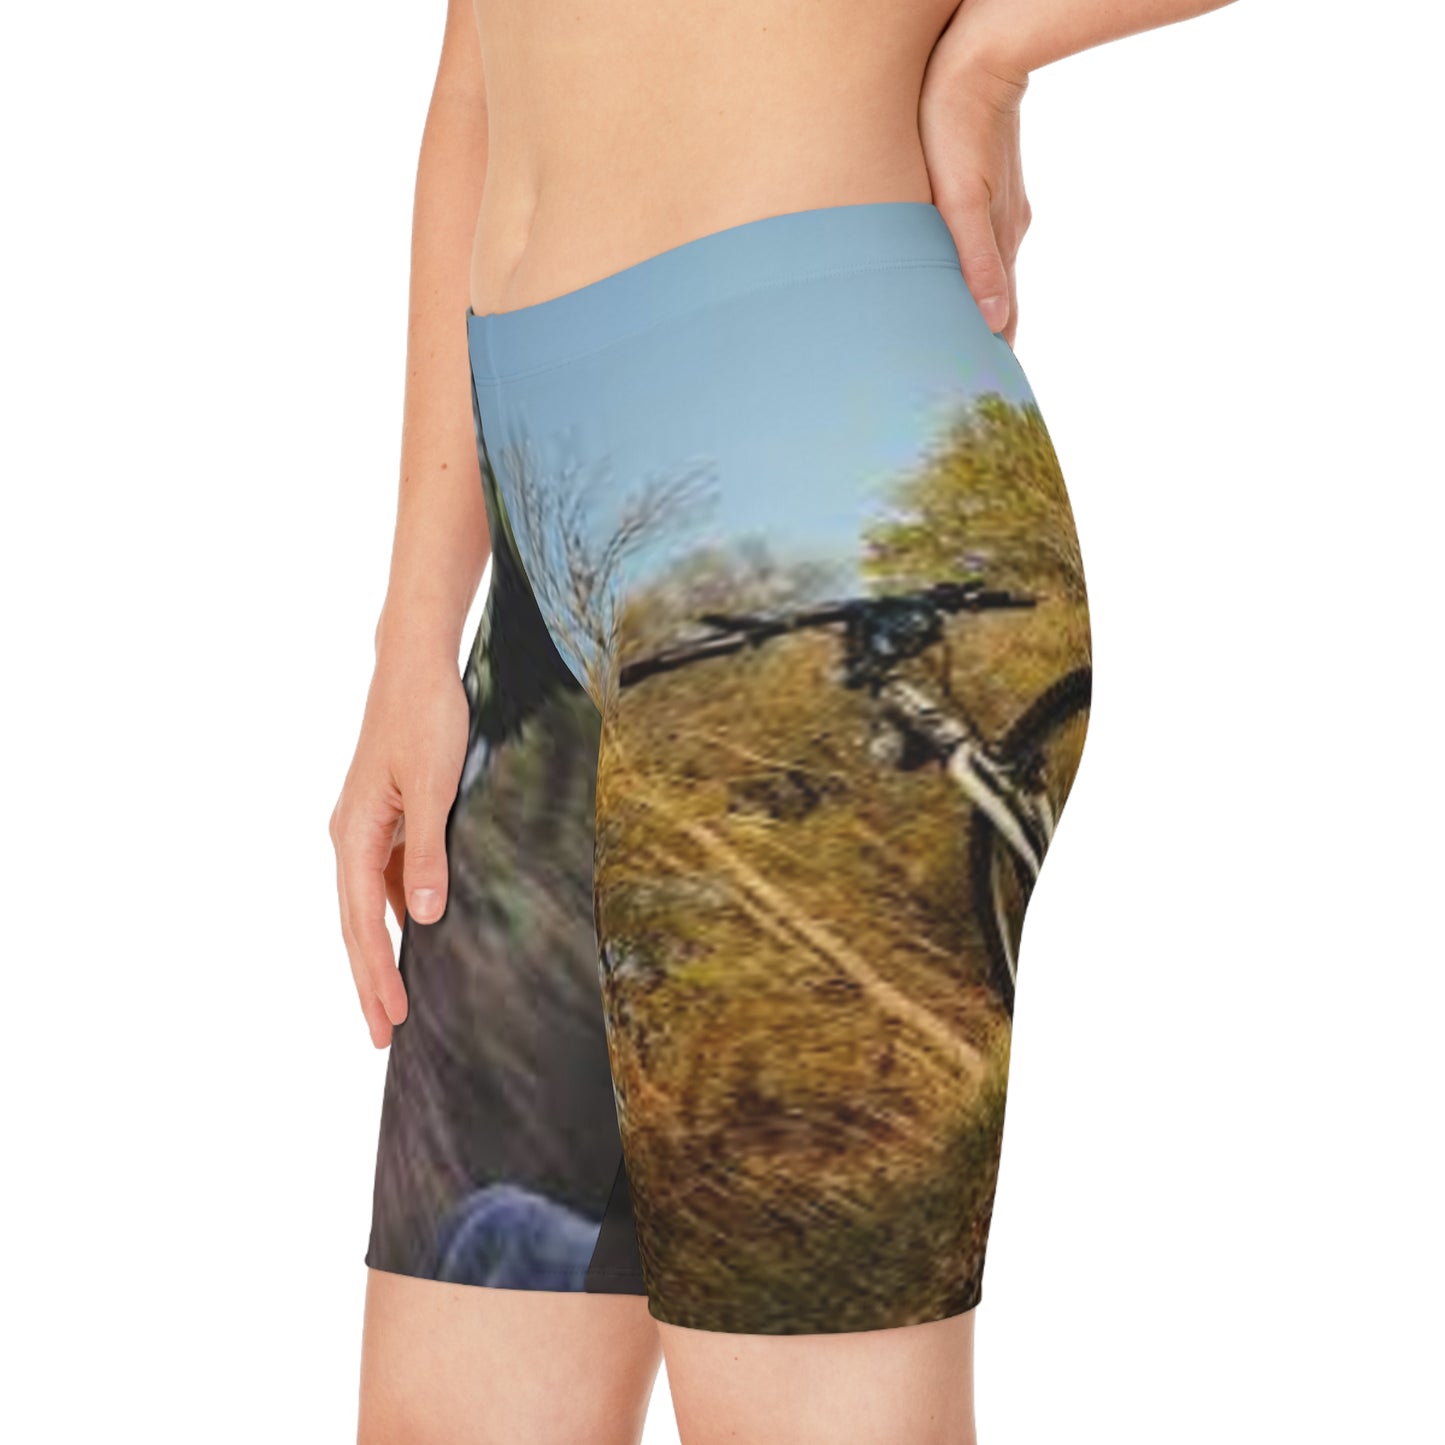 The B.E Style Brand "Hit the Trail" Bike Shorts for Her